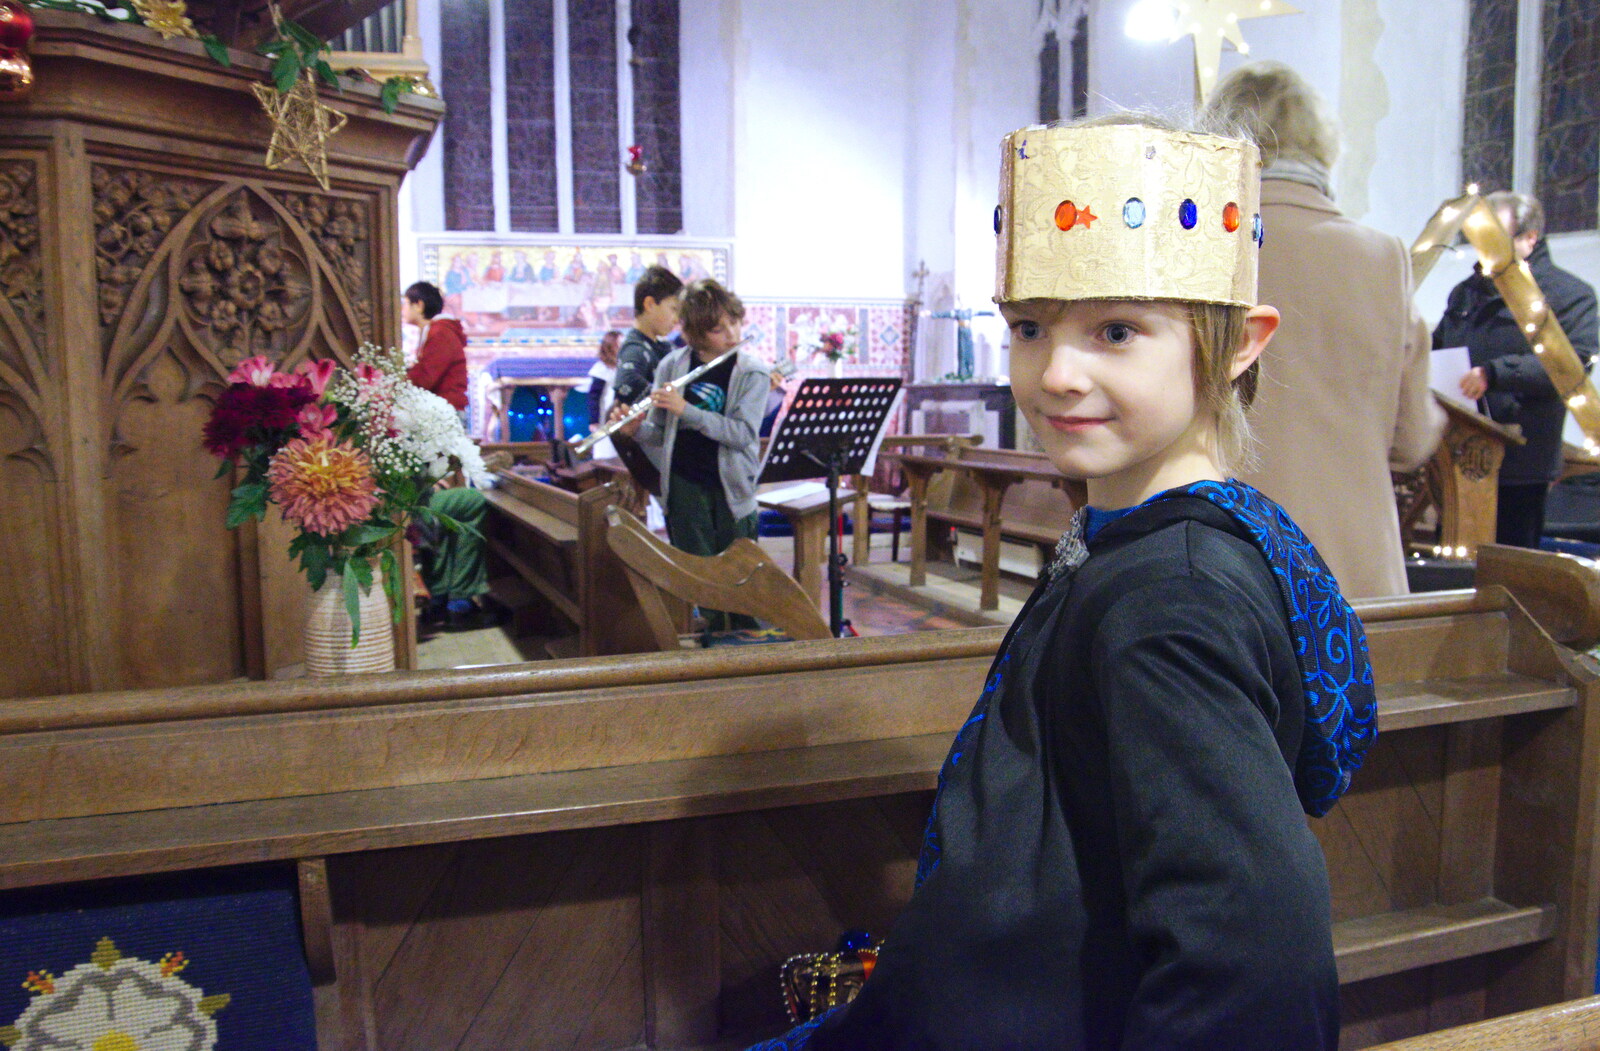 Harry with a paper crown on from A Christingle Service, St. Nicholas Church, Oakley, Suffolk - 24th December 2019